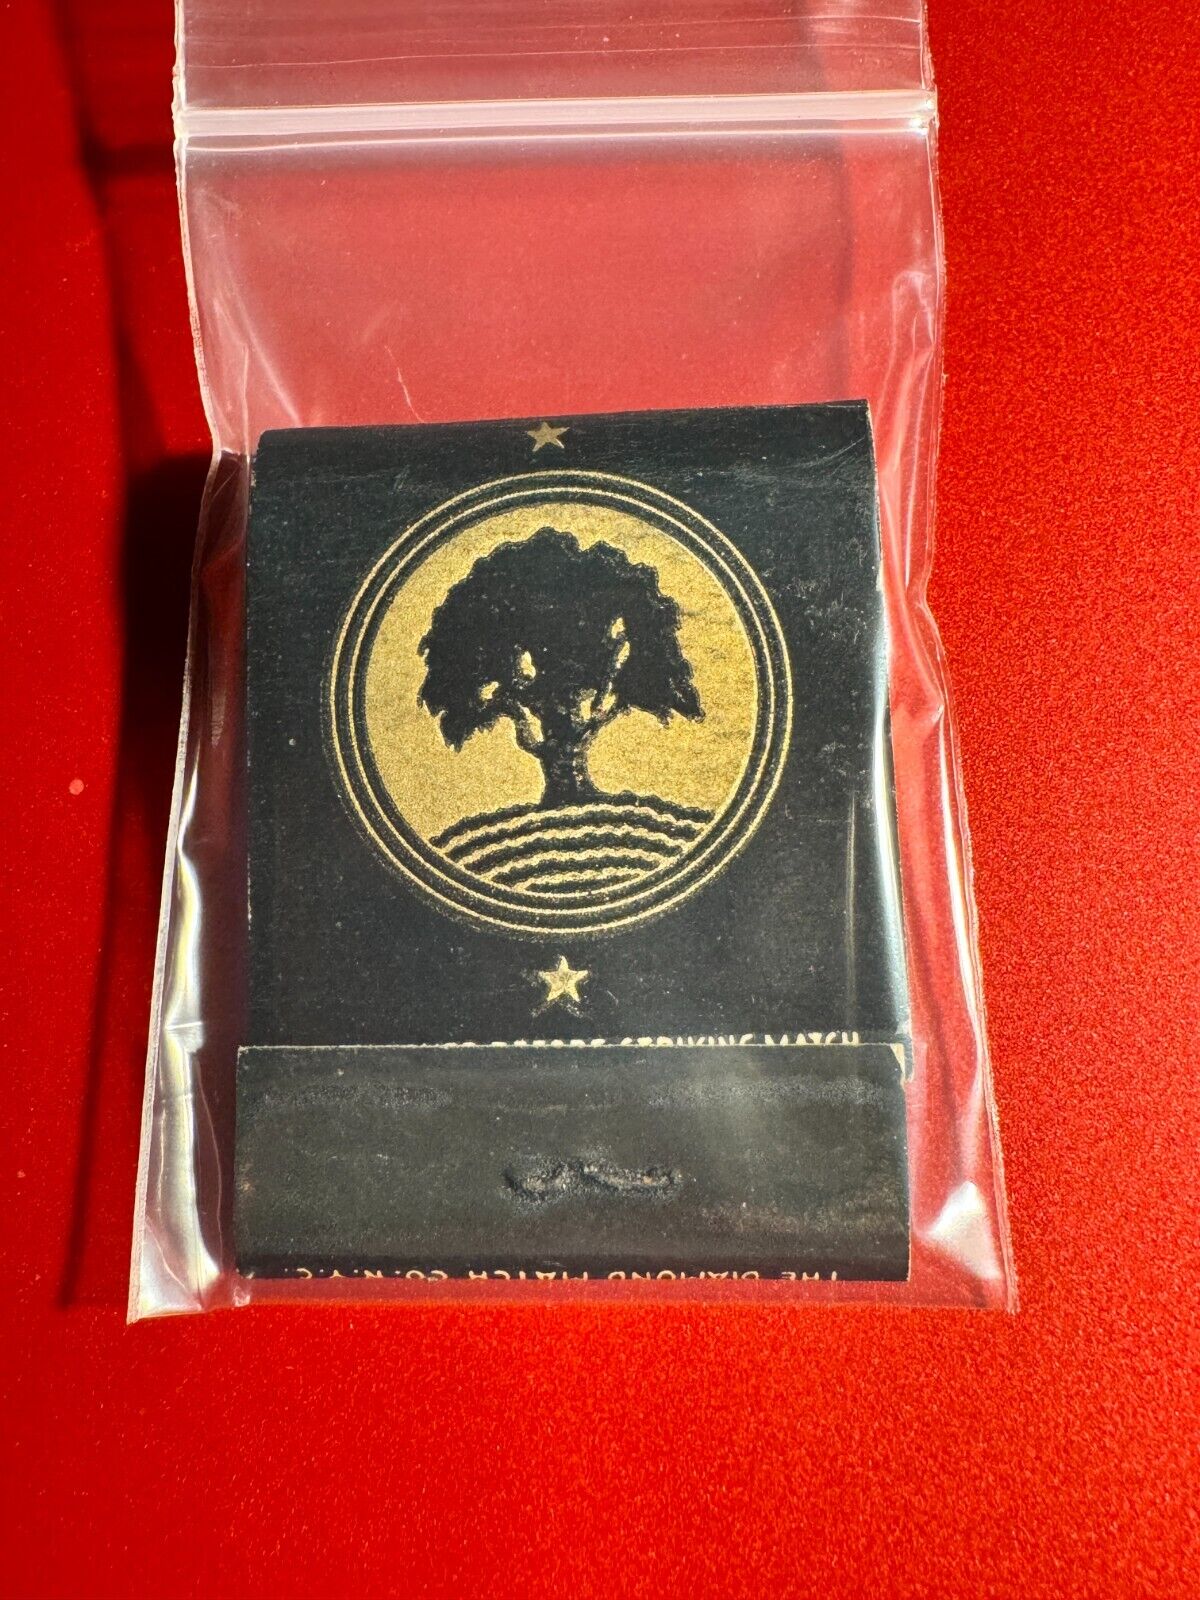 MATCHBOOK - SSCC - SOUTH SHORE COUNTRY CLUB - CHICAGO, IL - UNSTRUCK BEAUTY